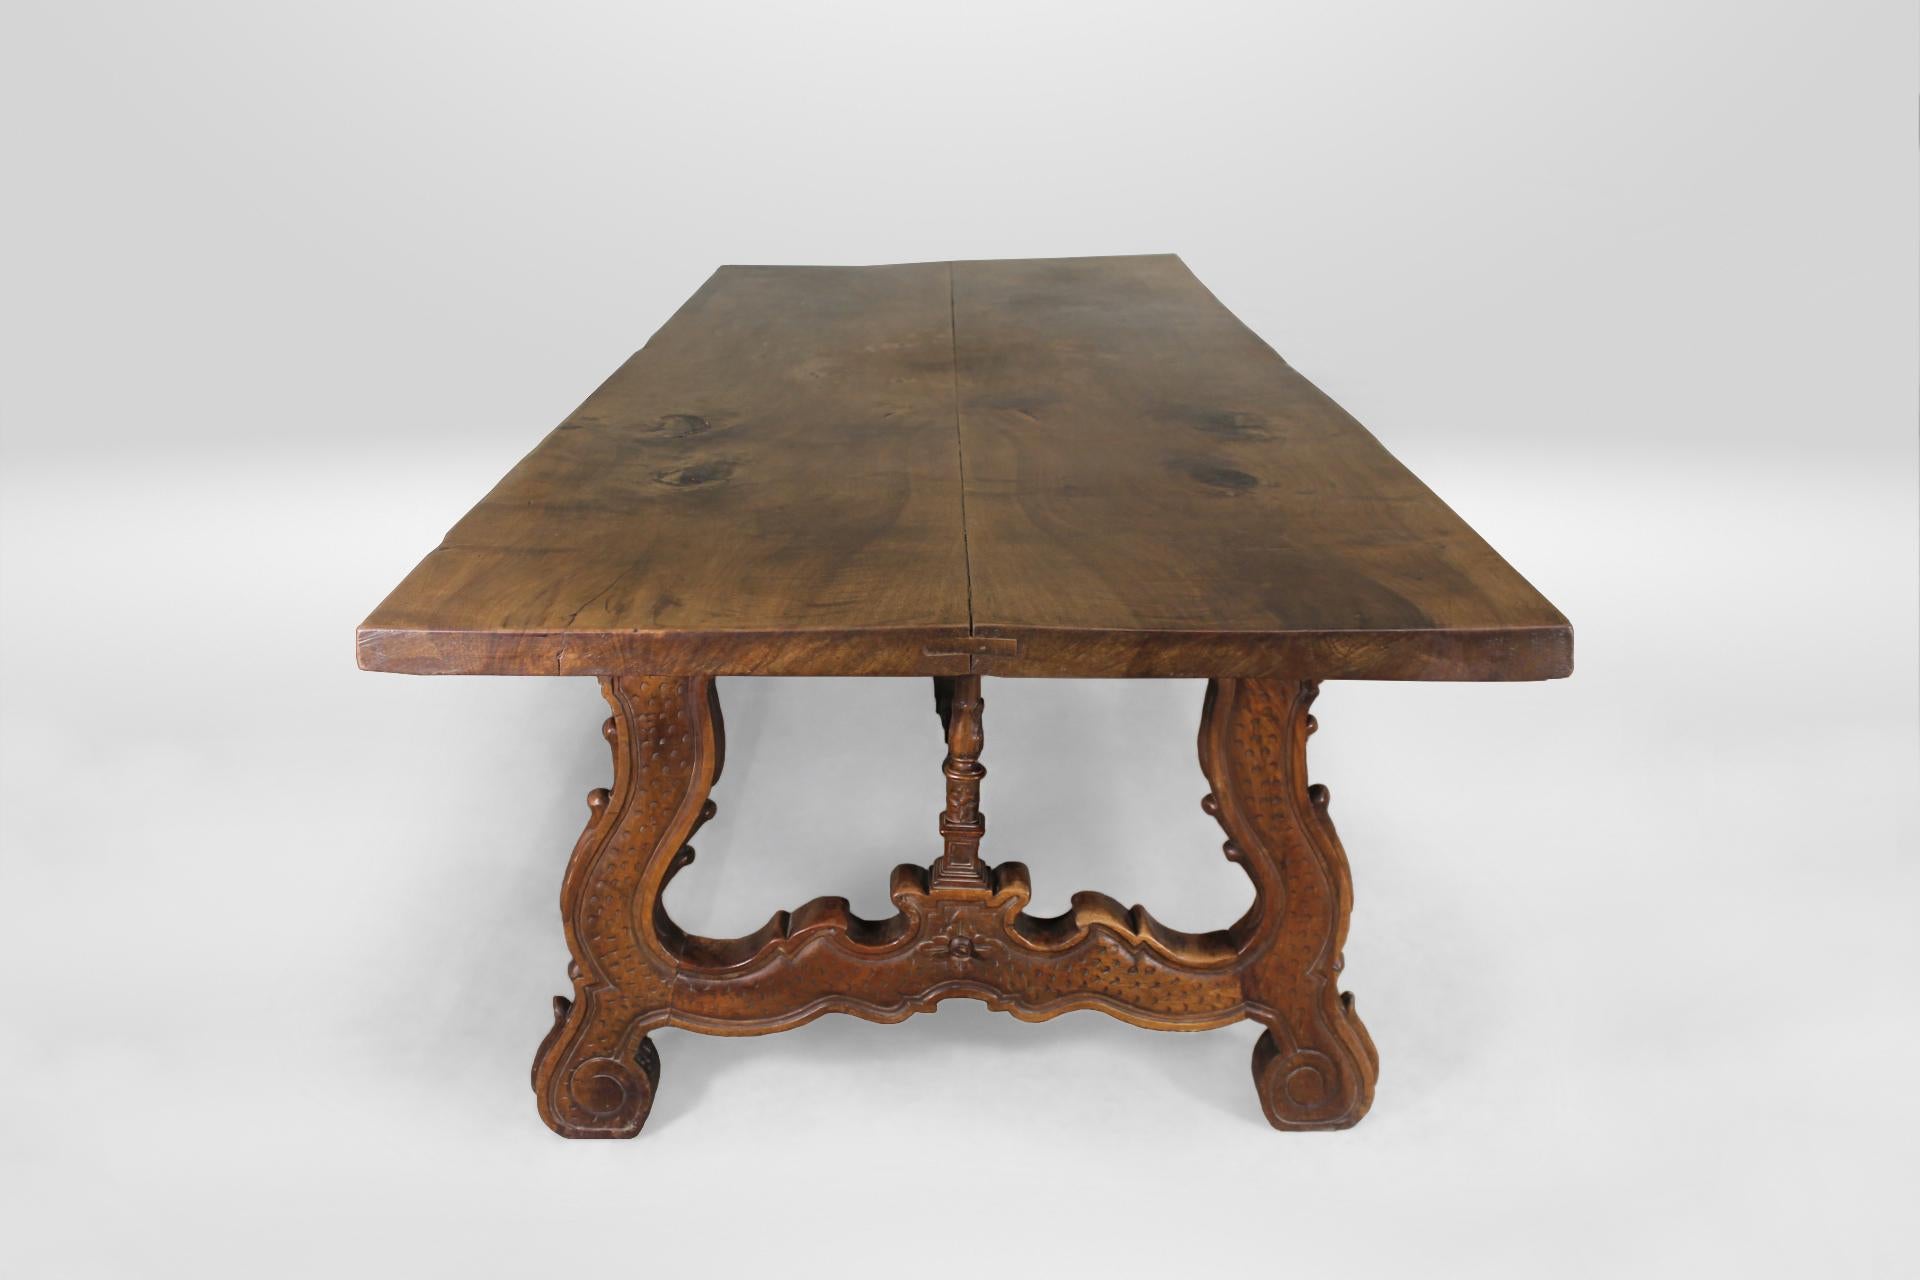 Baroque Spanish Friar Table in “Liria” style made of Olive tree wood & Iron, s. XVIII For Sale